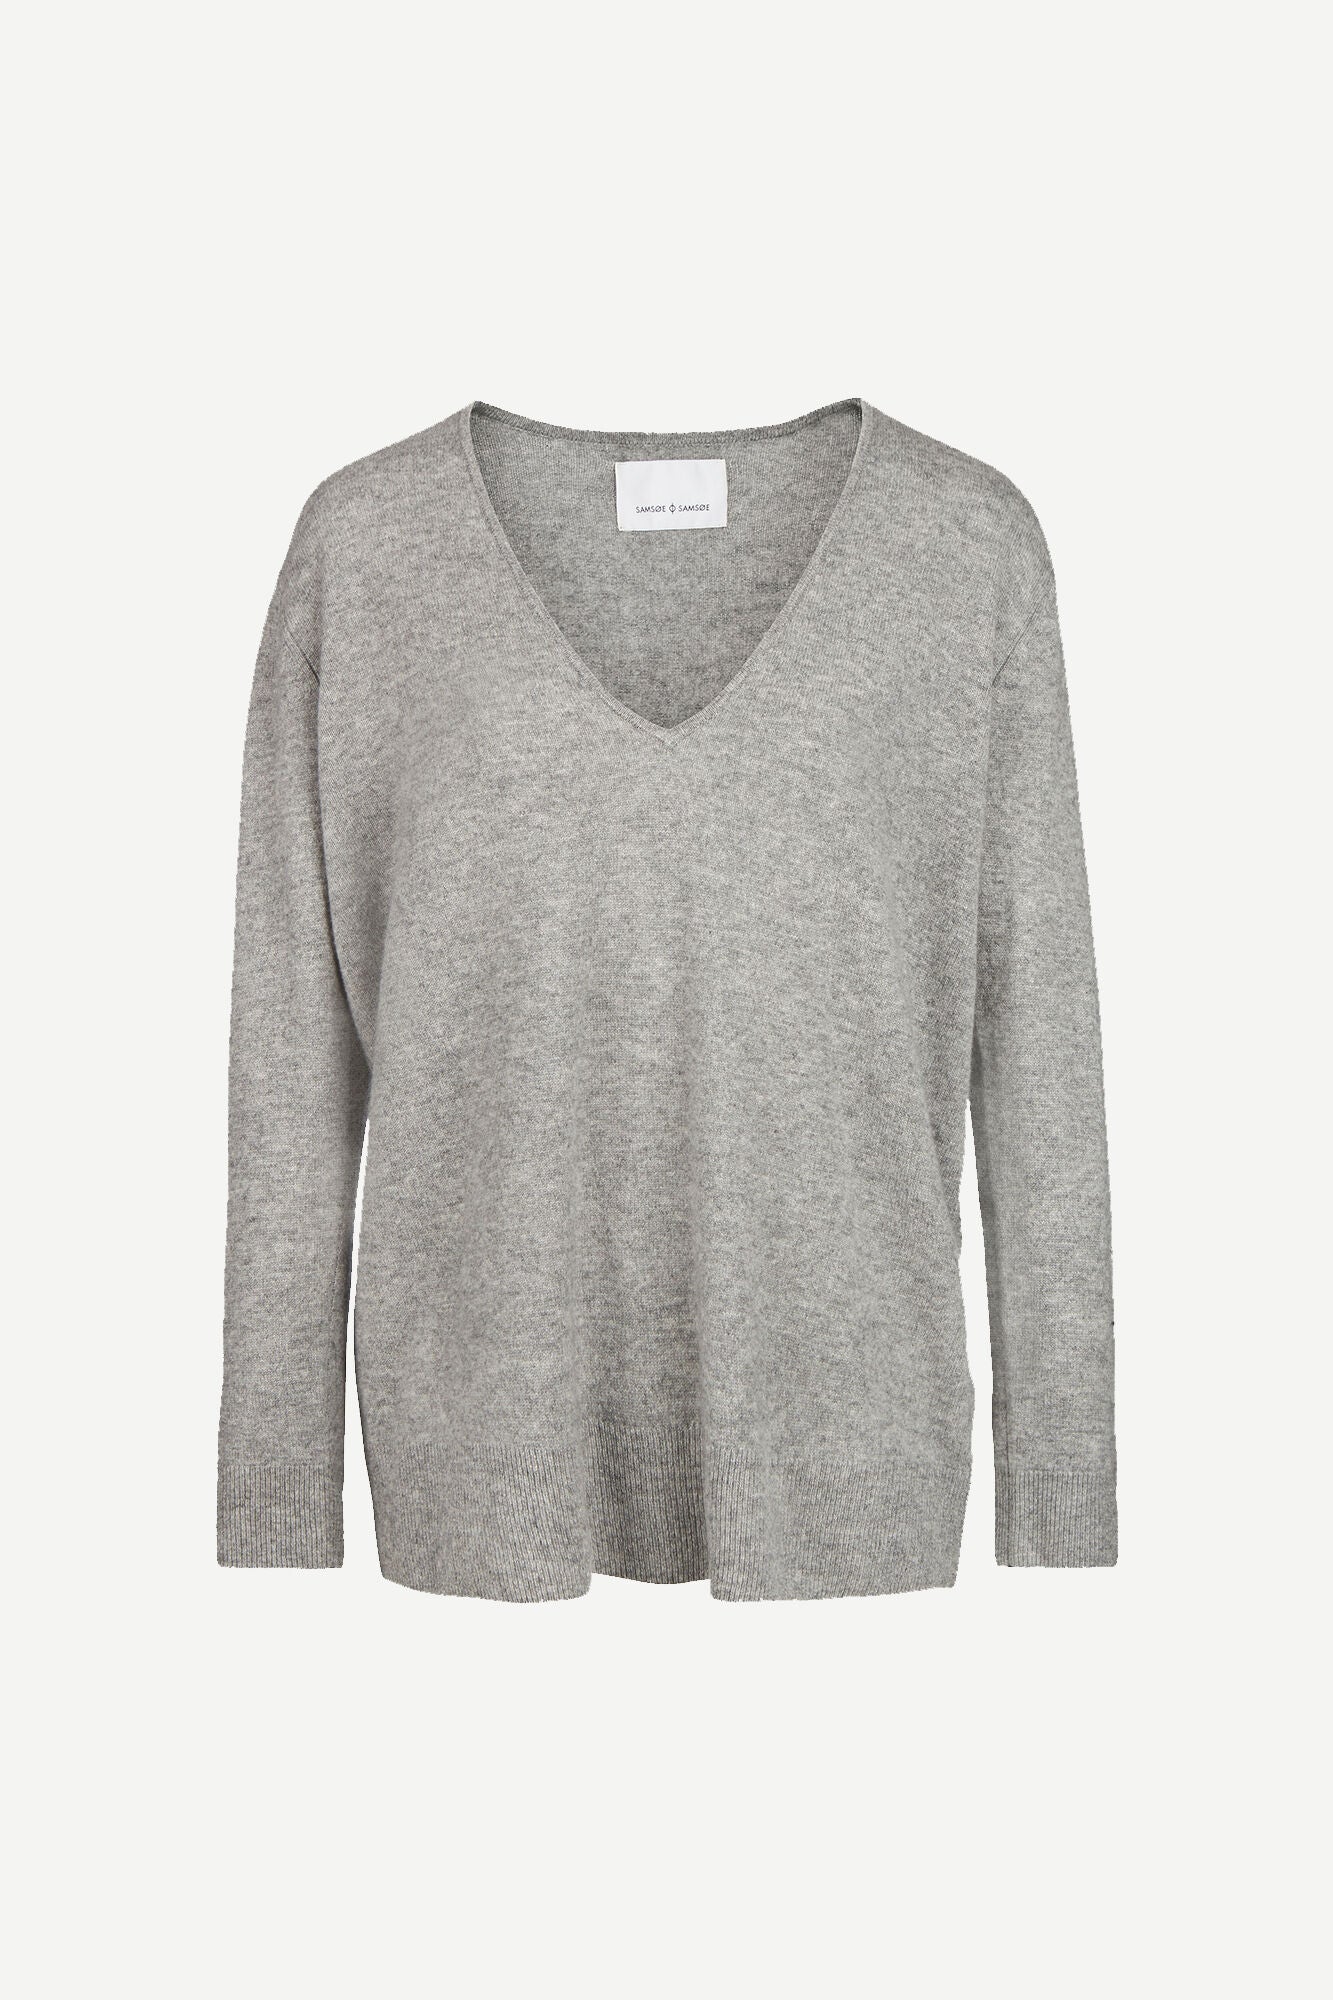 PURE CASHMERE DEEP V NECK KNIT IN GREY